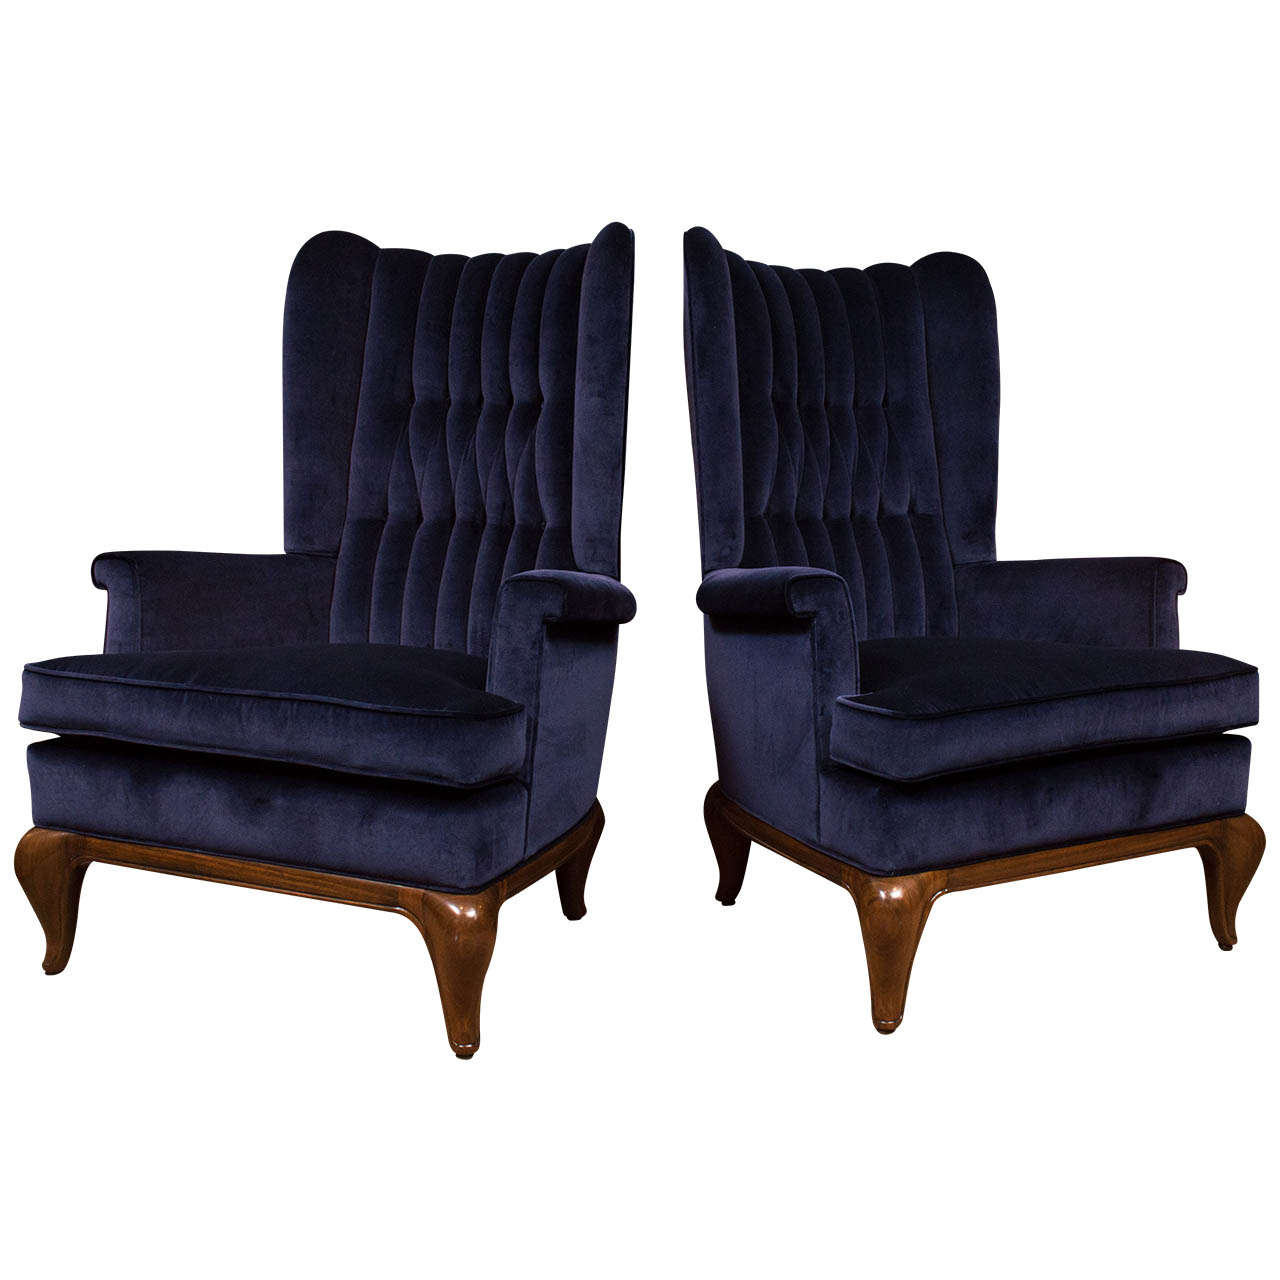 Monteverde-Young Wing Chairs